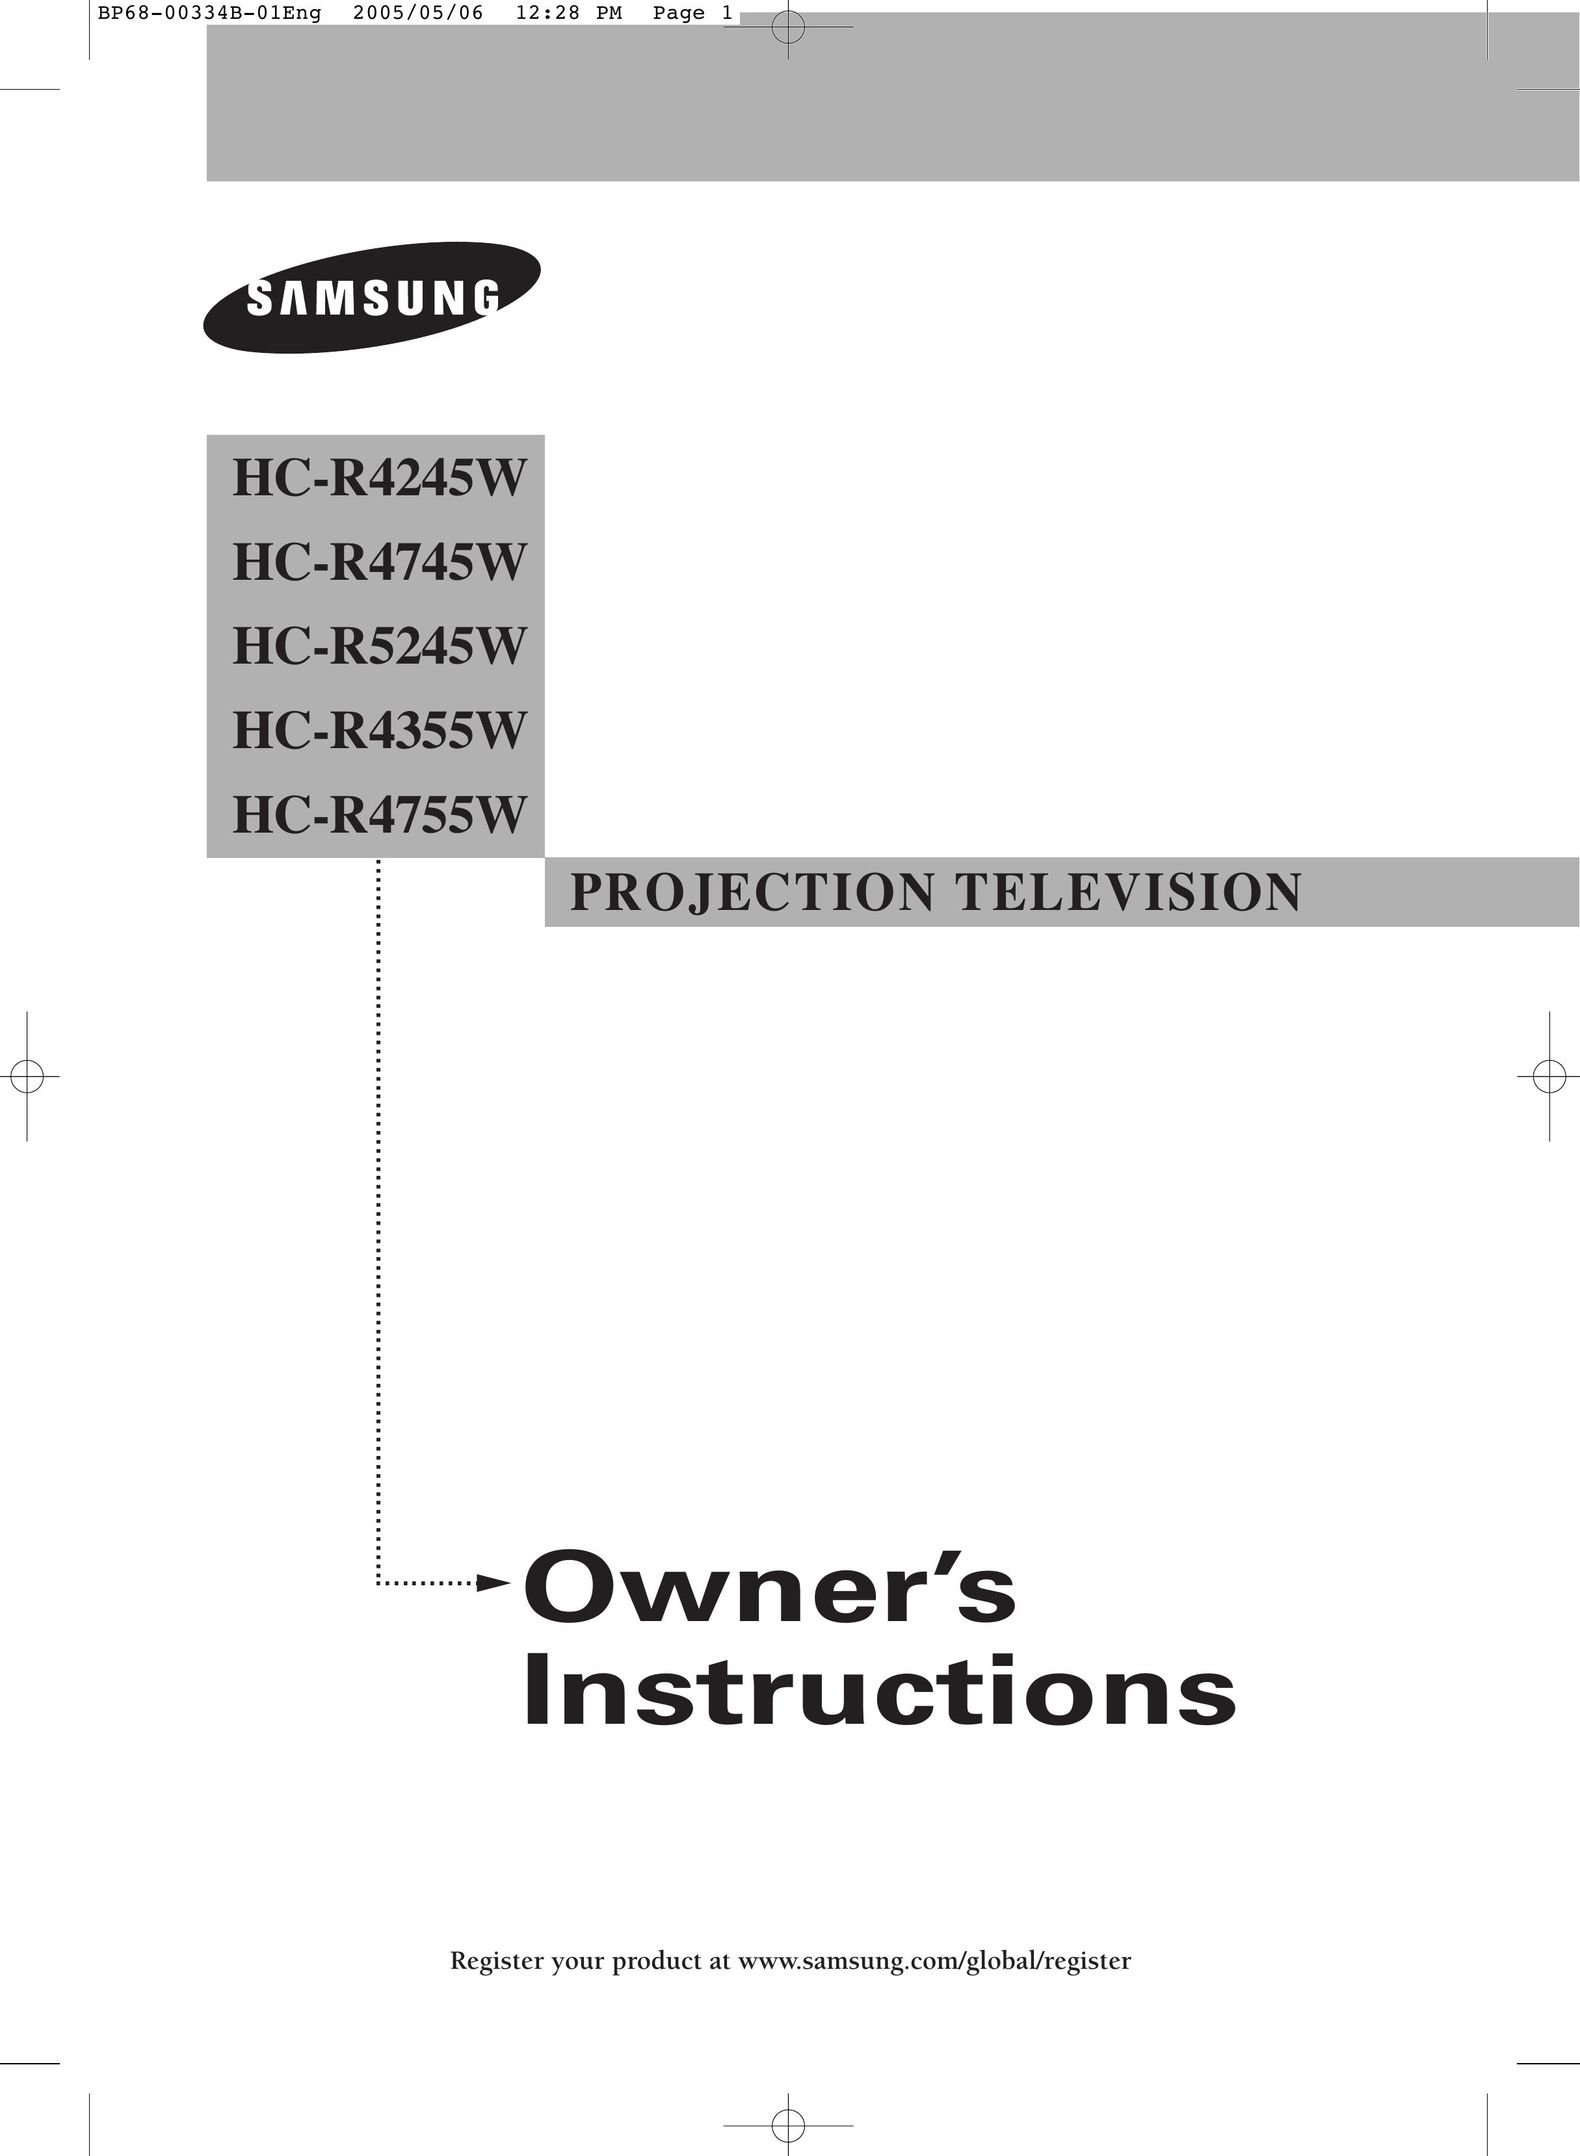 Samsung HC-R5245W Projection Television User Manual